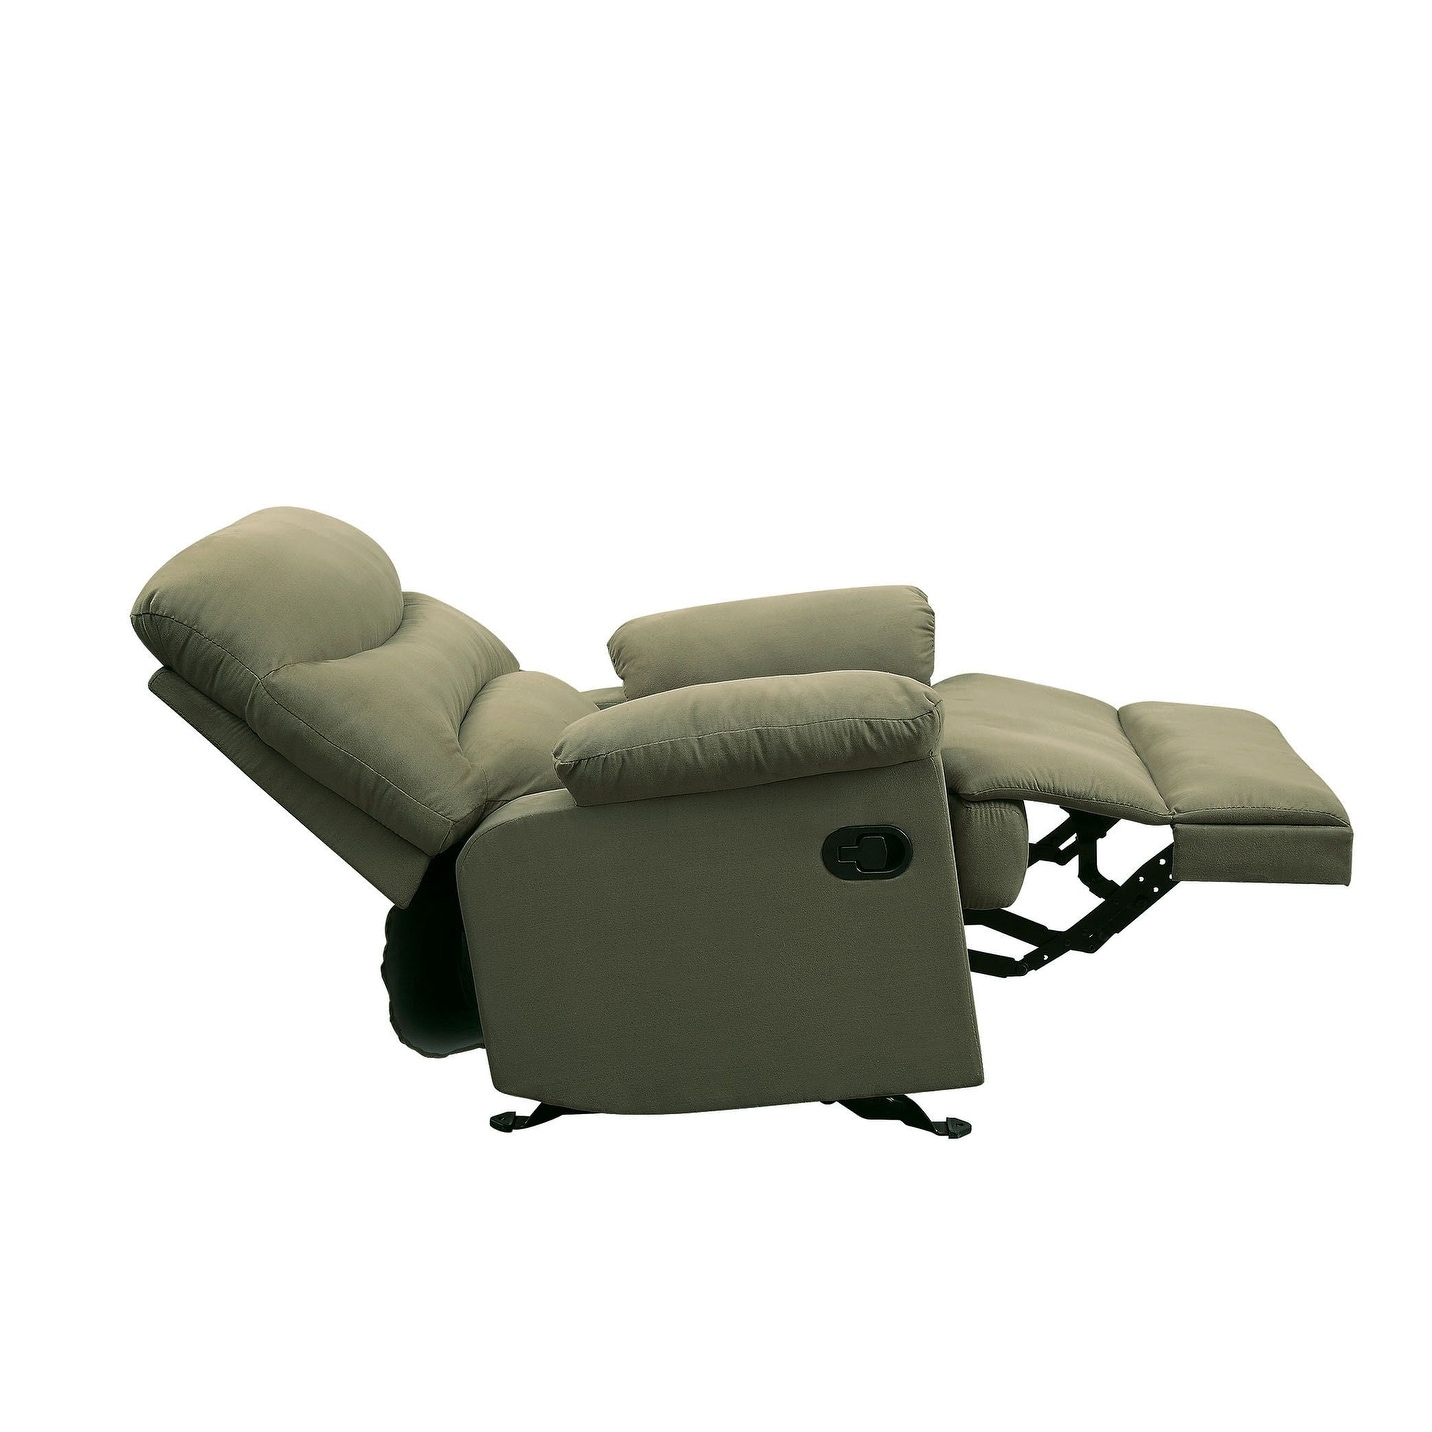 https://ak1.ostkcdn.com/images/products/is/images/direct/87b9f35628fb49b3b522af480d49206e4e82410e/Microfiber-Adjustable-Recliner-Chair-with-Footrest-Extension-%26-Pillow-Top-Arms%2C-Cushioned-Single-Sofa-for-Livingroom.jpg